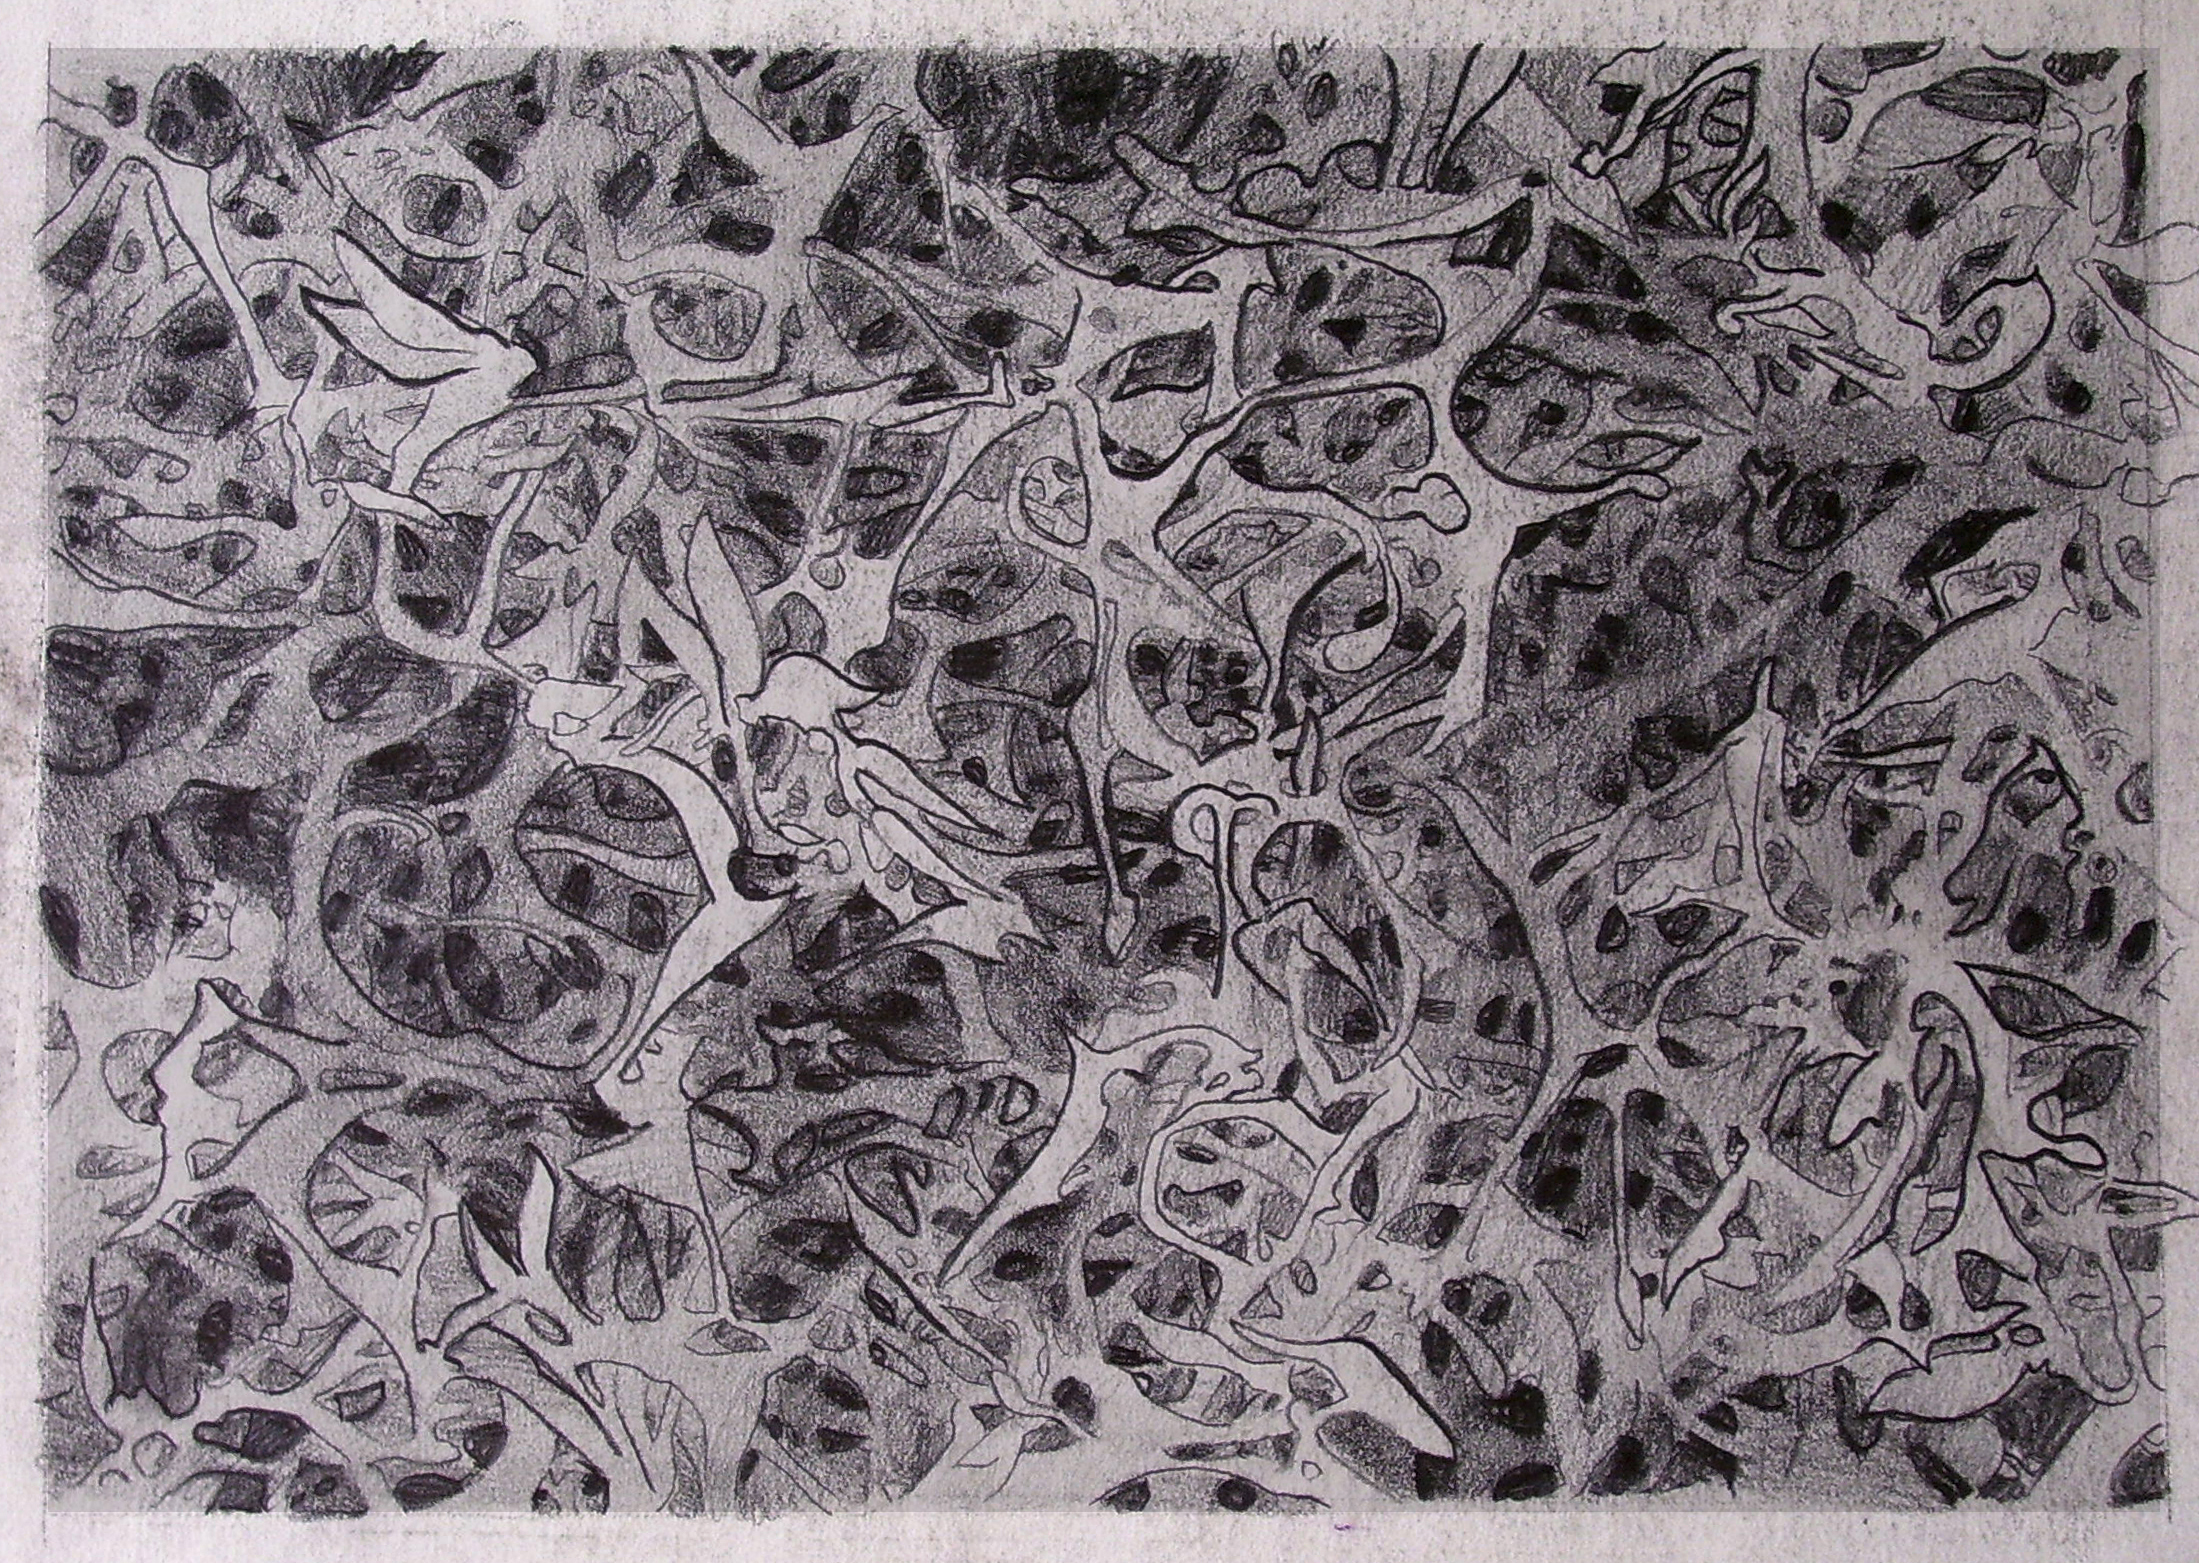  Connectoids/ 2004/ graphite on paper/ 9 x 12 inches 